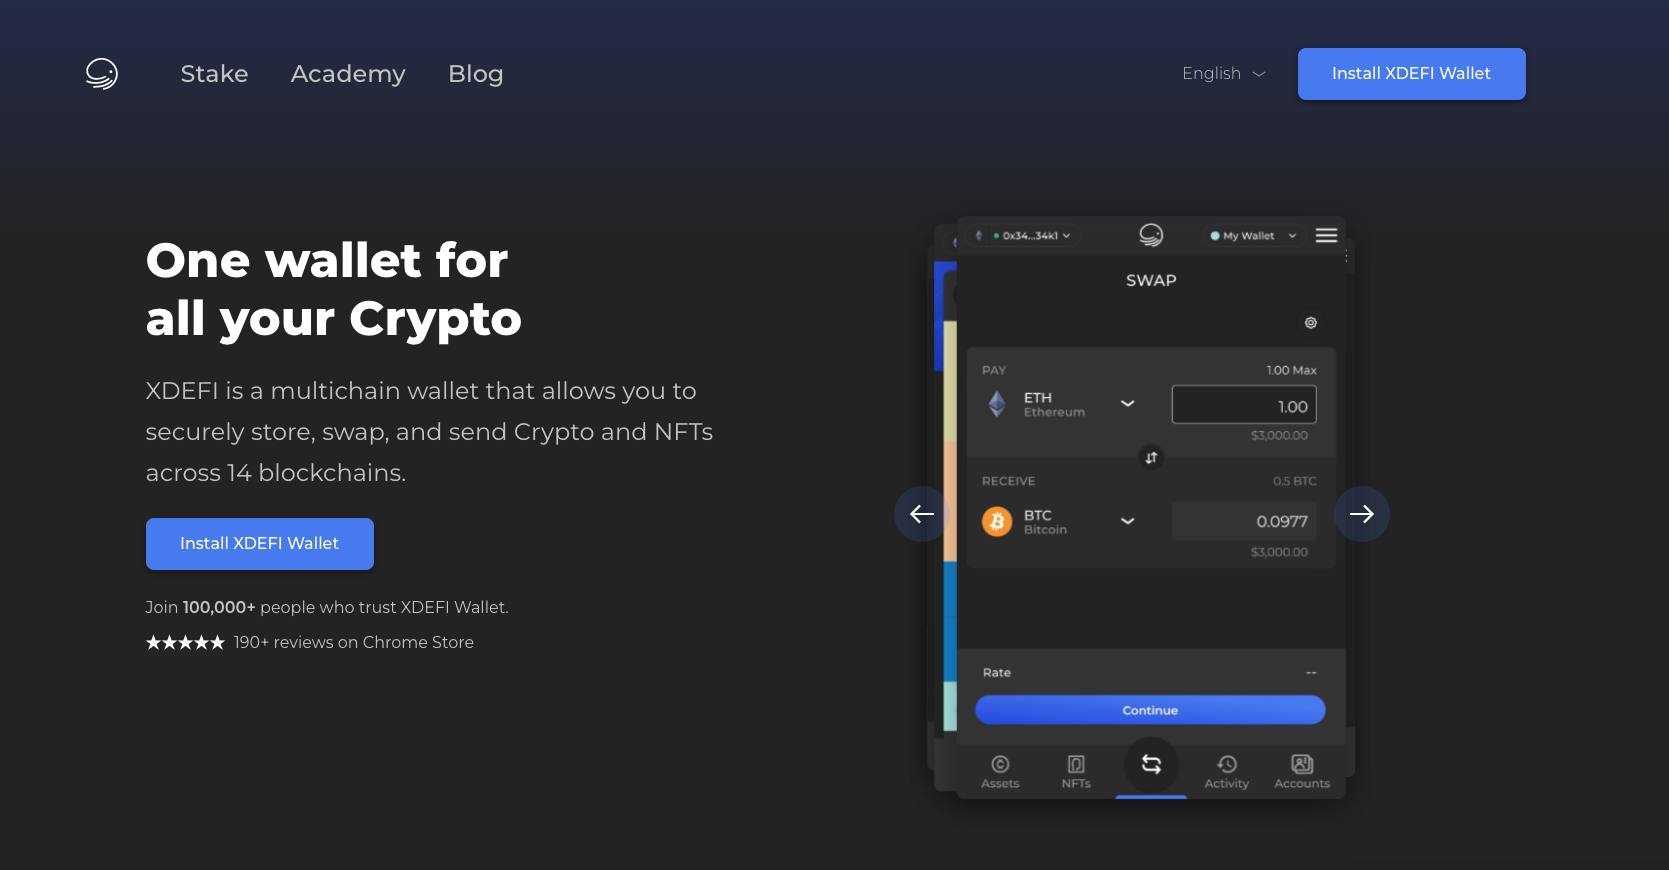 crypto wallet in the philippines - XDEFI